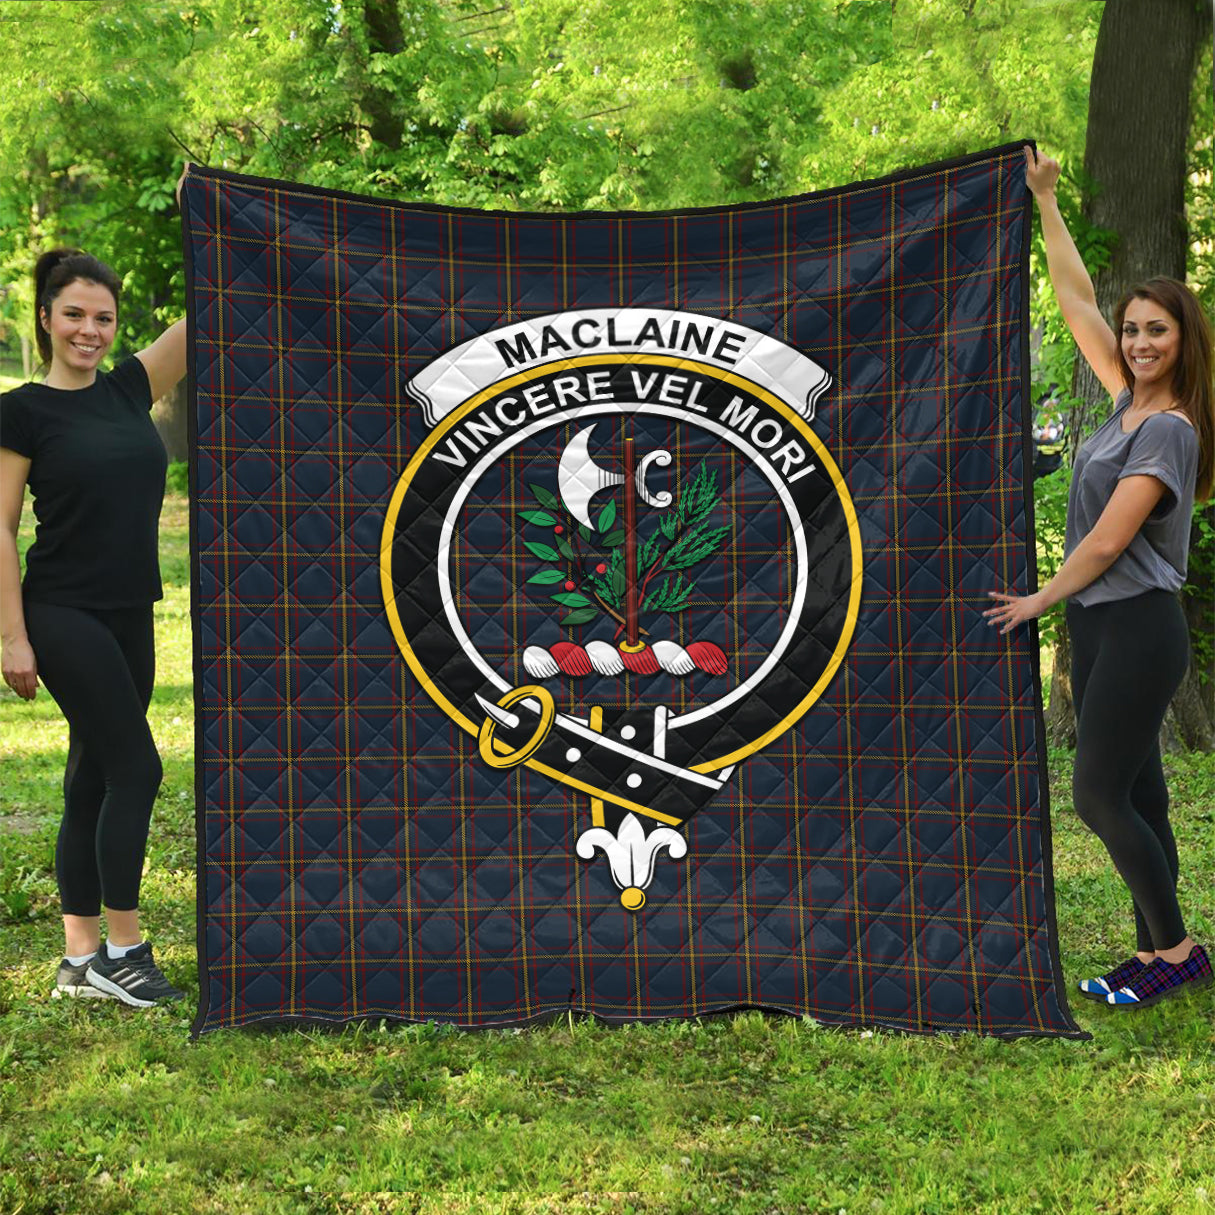 maclaine-of-lochbuie-hunting-tartan-quilt-with-family-crest